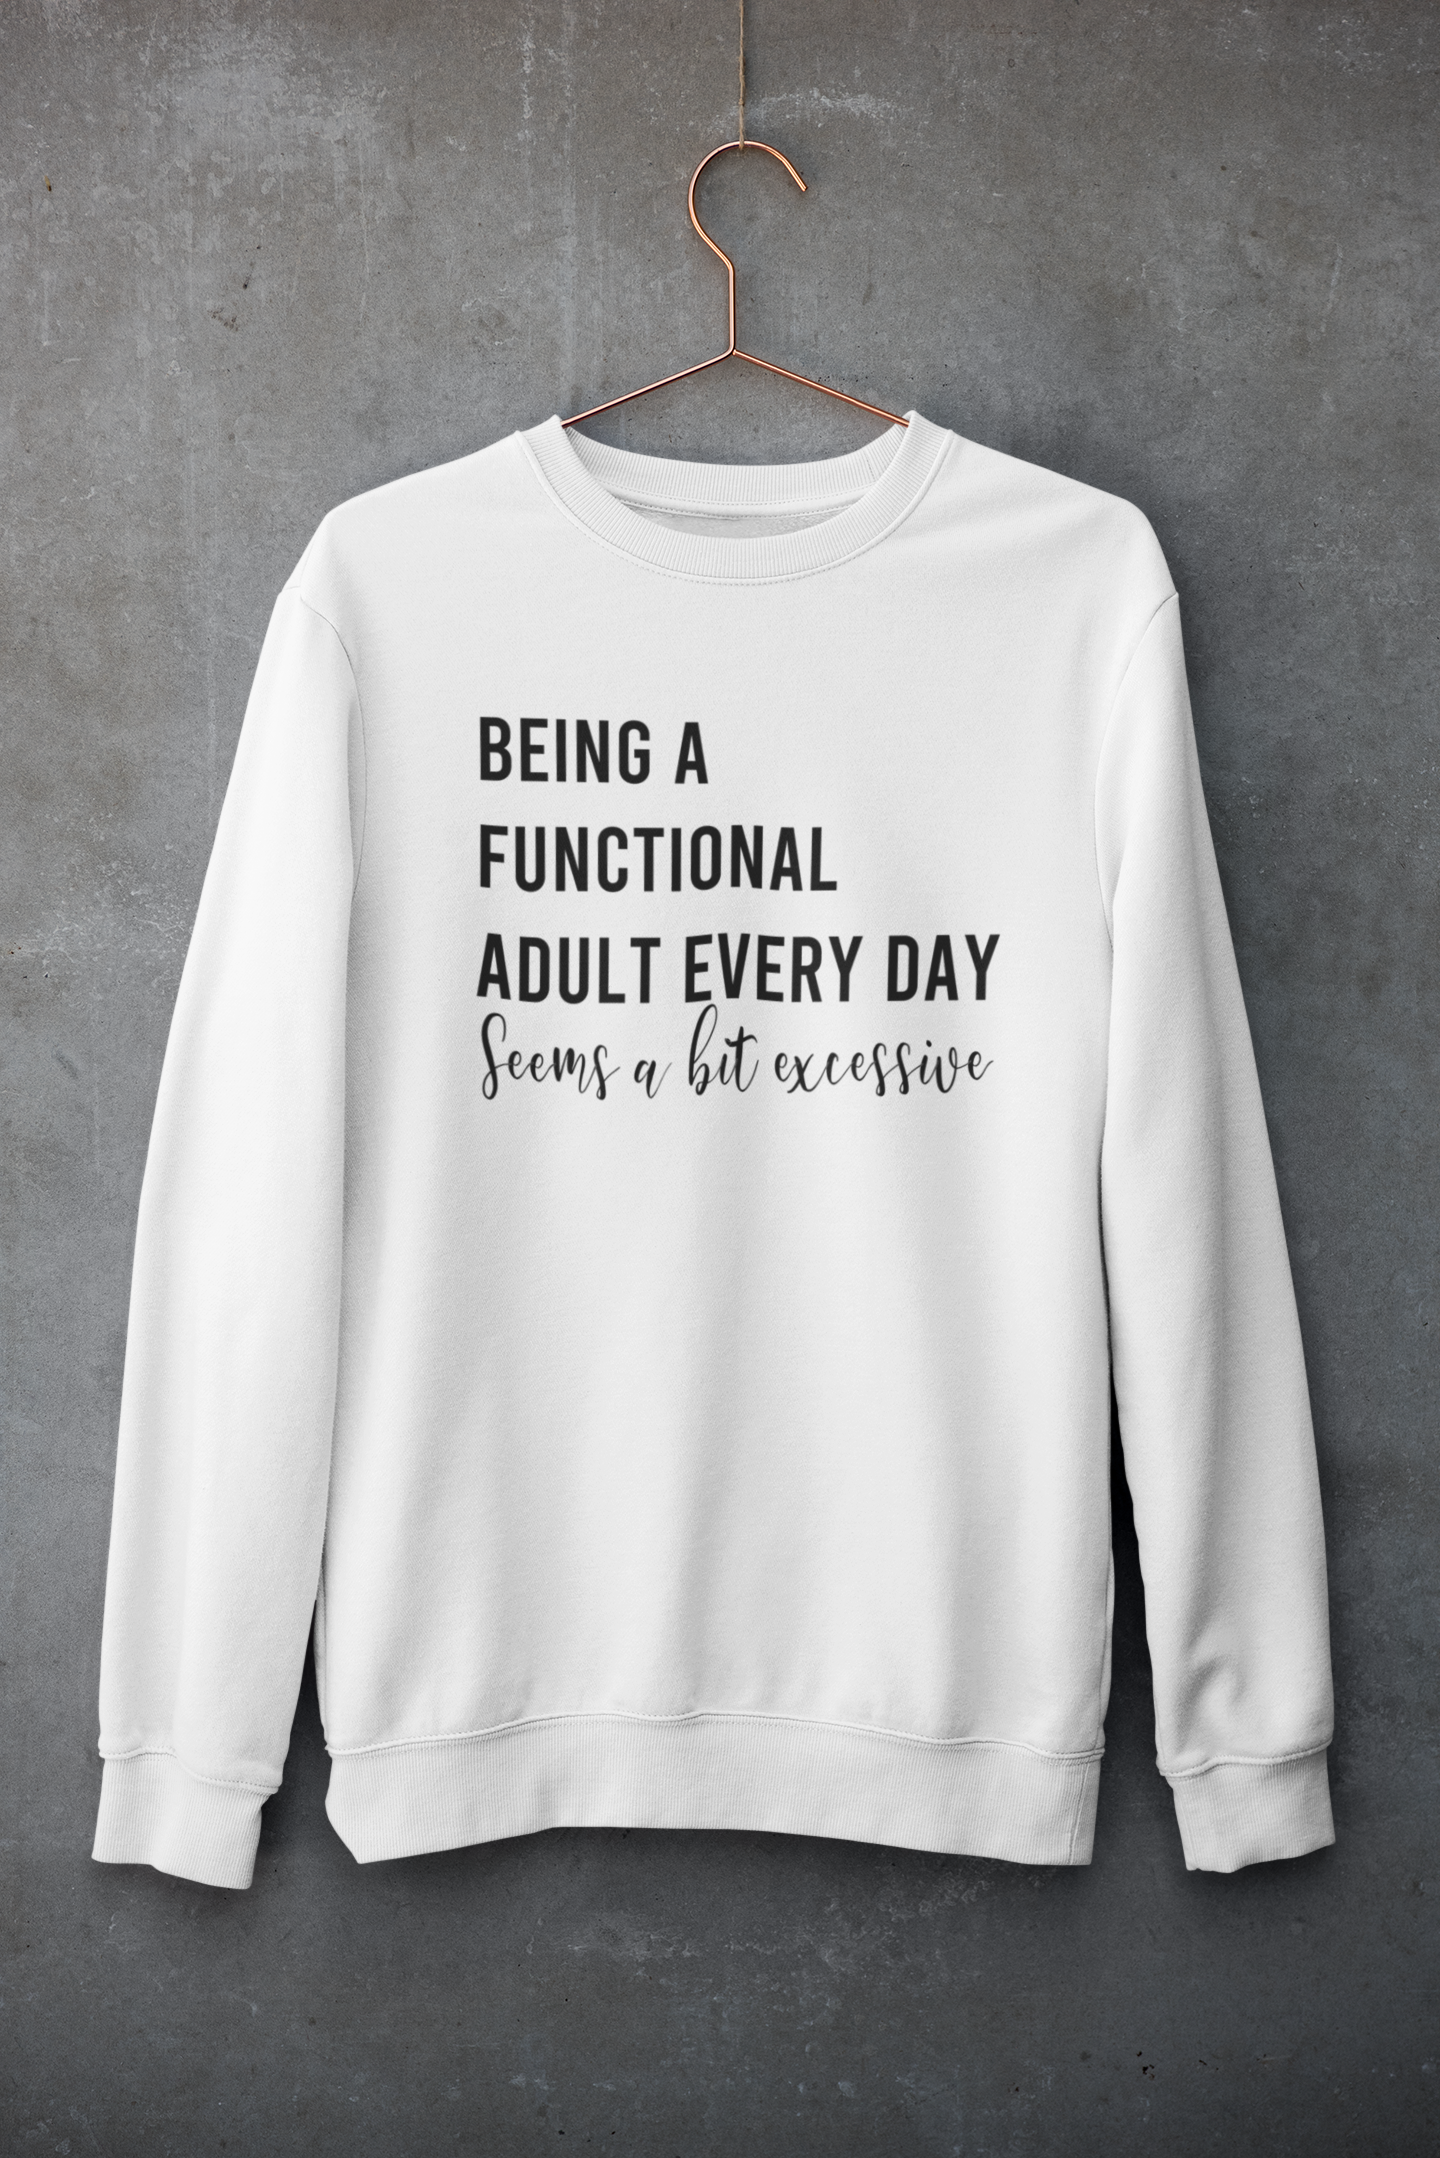 Being a functional adult every day is a bit excessive sweater